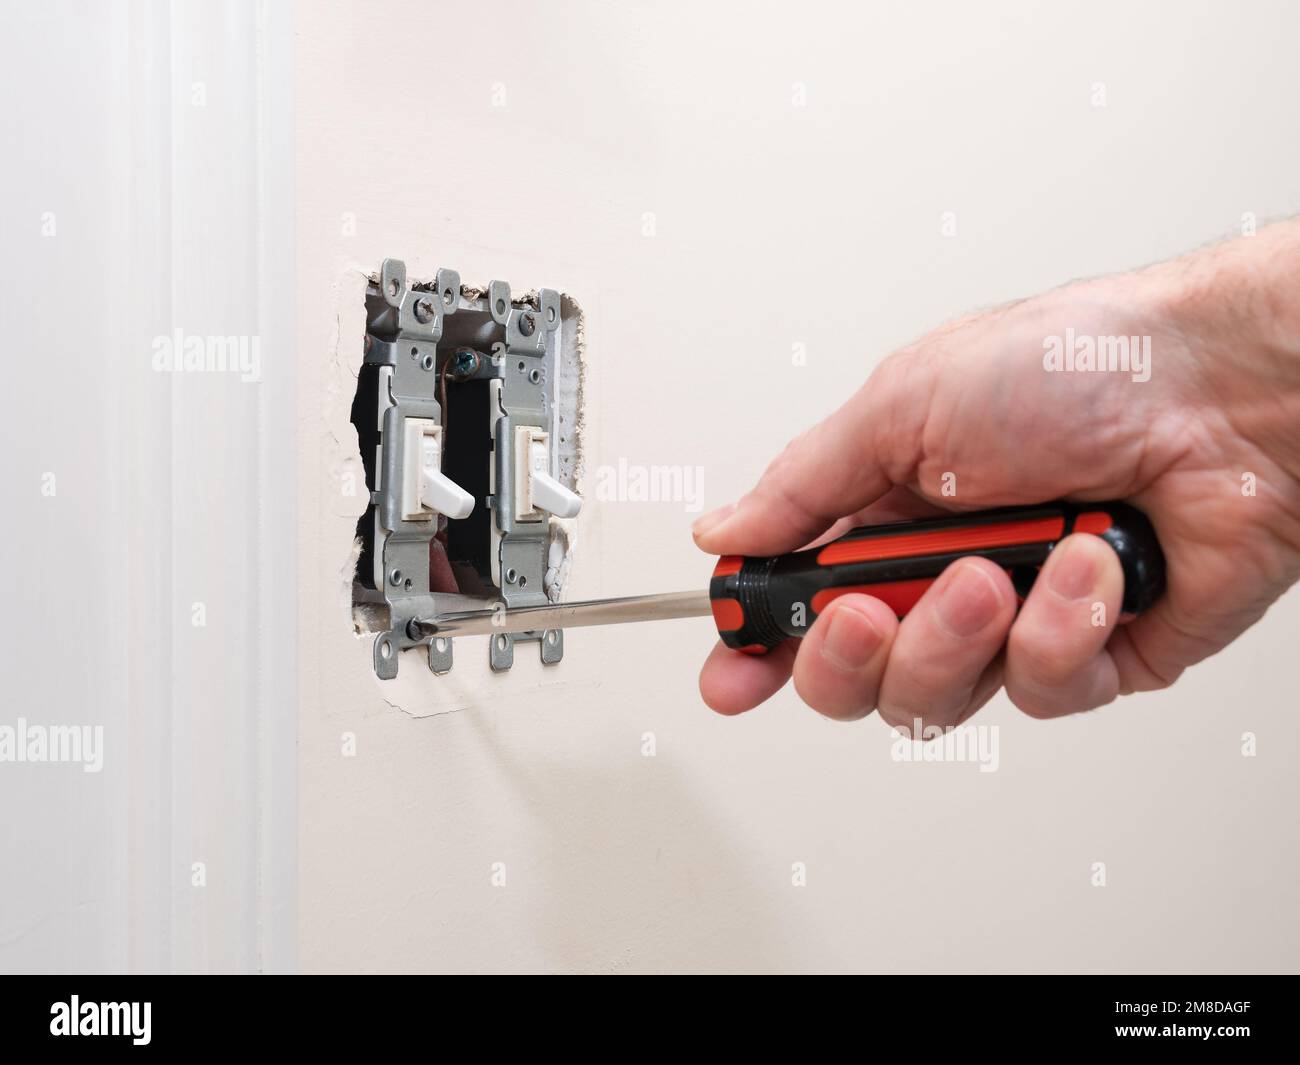 Male electrician repairing wall light switch panel. Handyman using screwdriver to install screw on light switch. Stock Photo